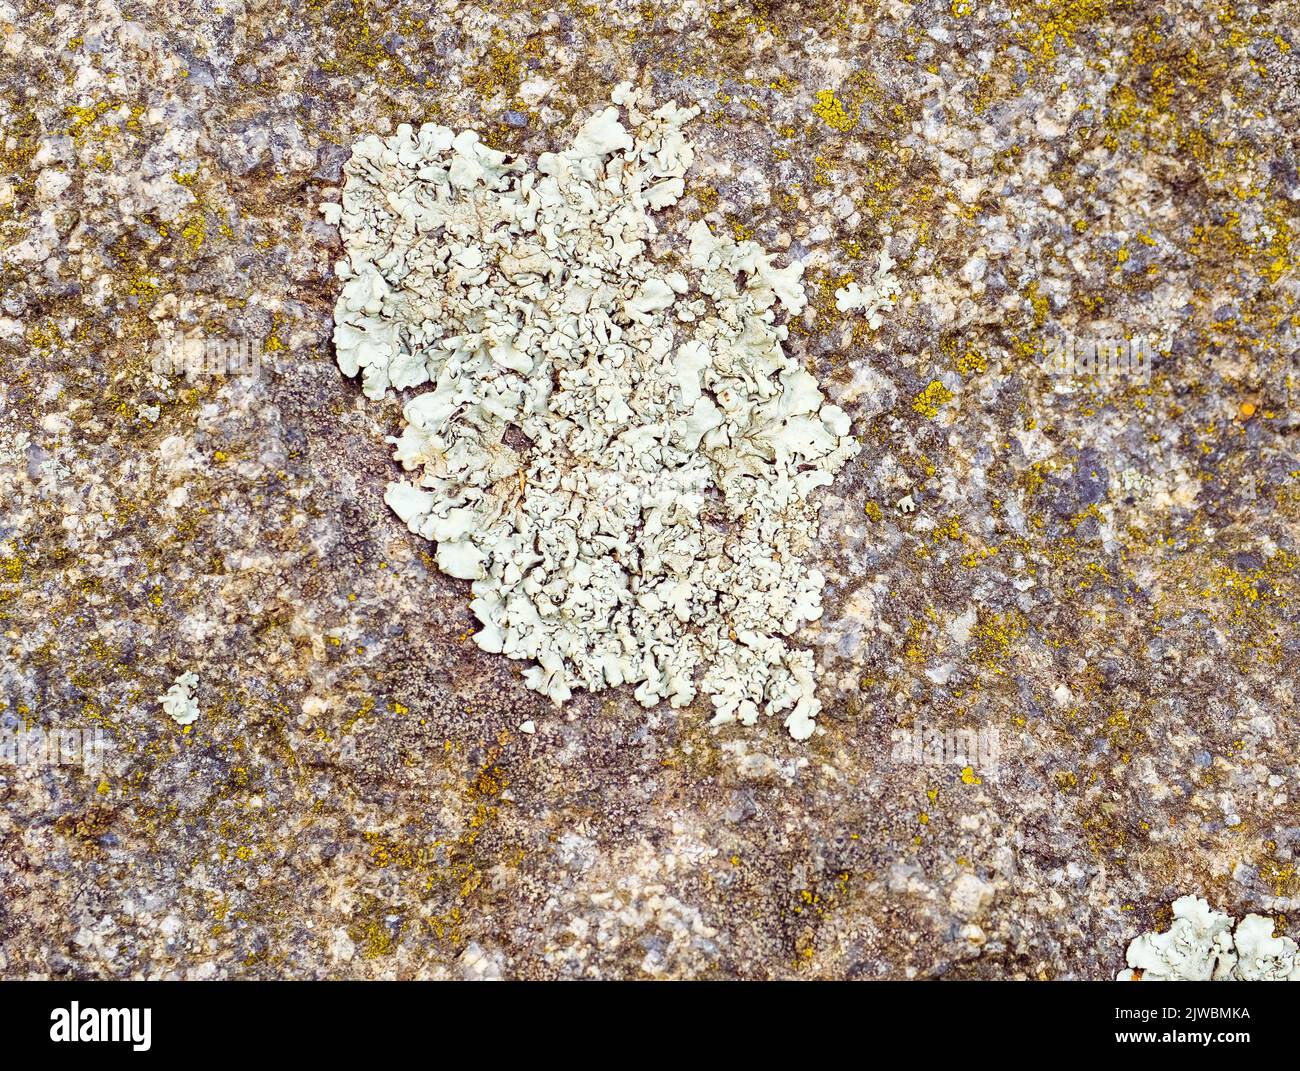 Lecanora muralis and the moss on the rock Stock Photo